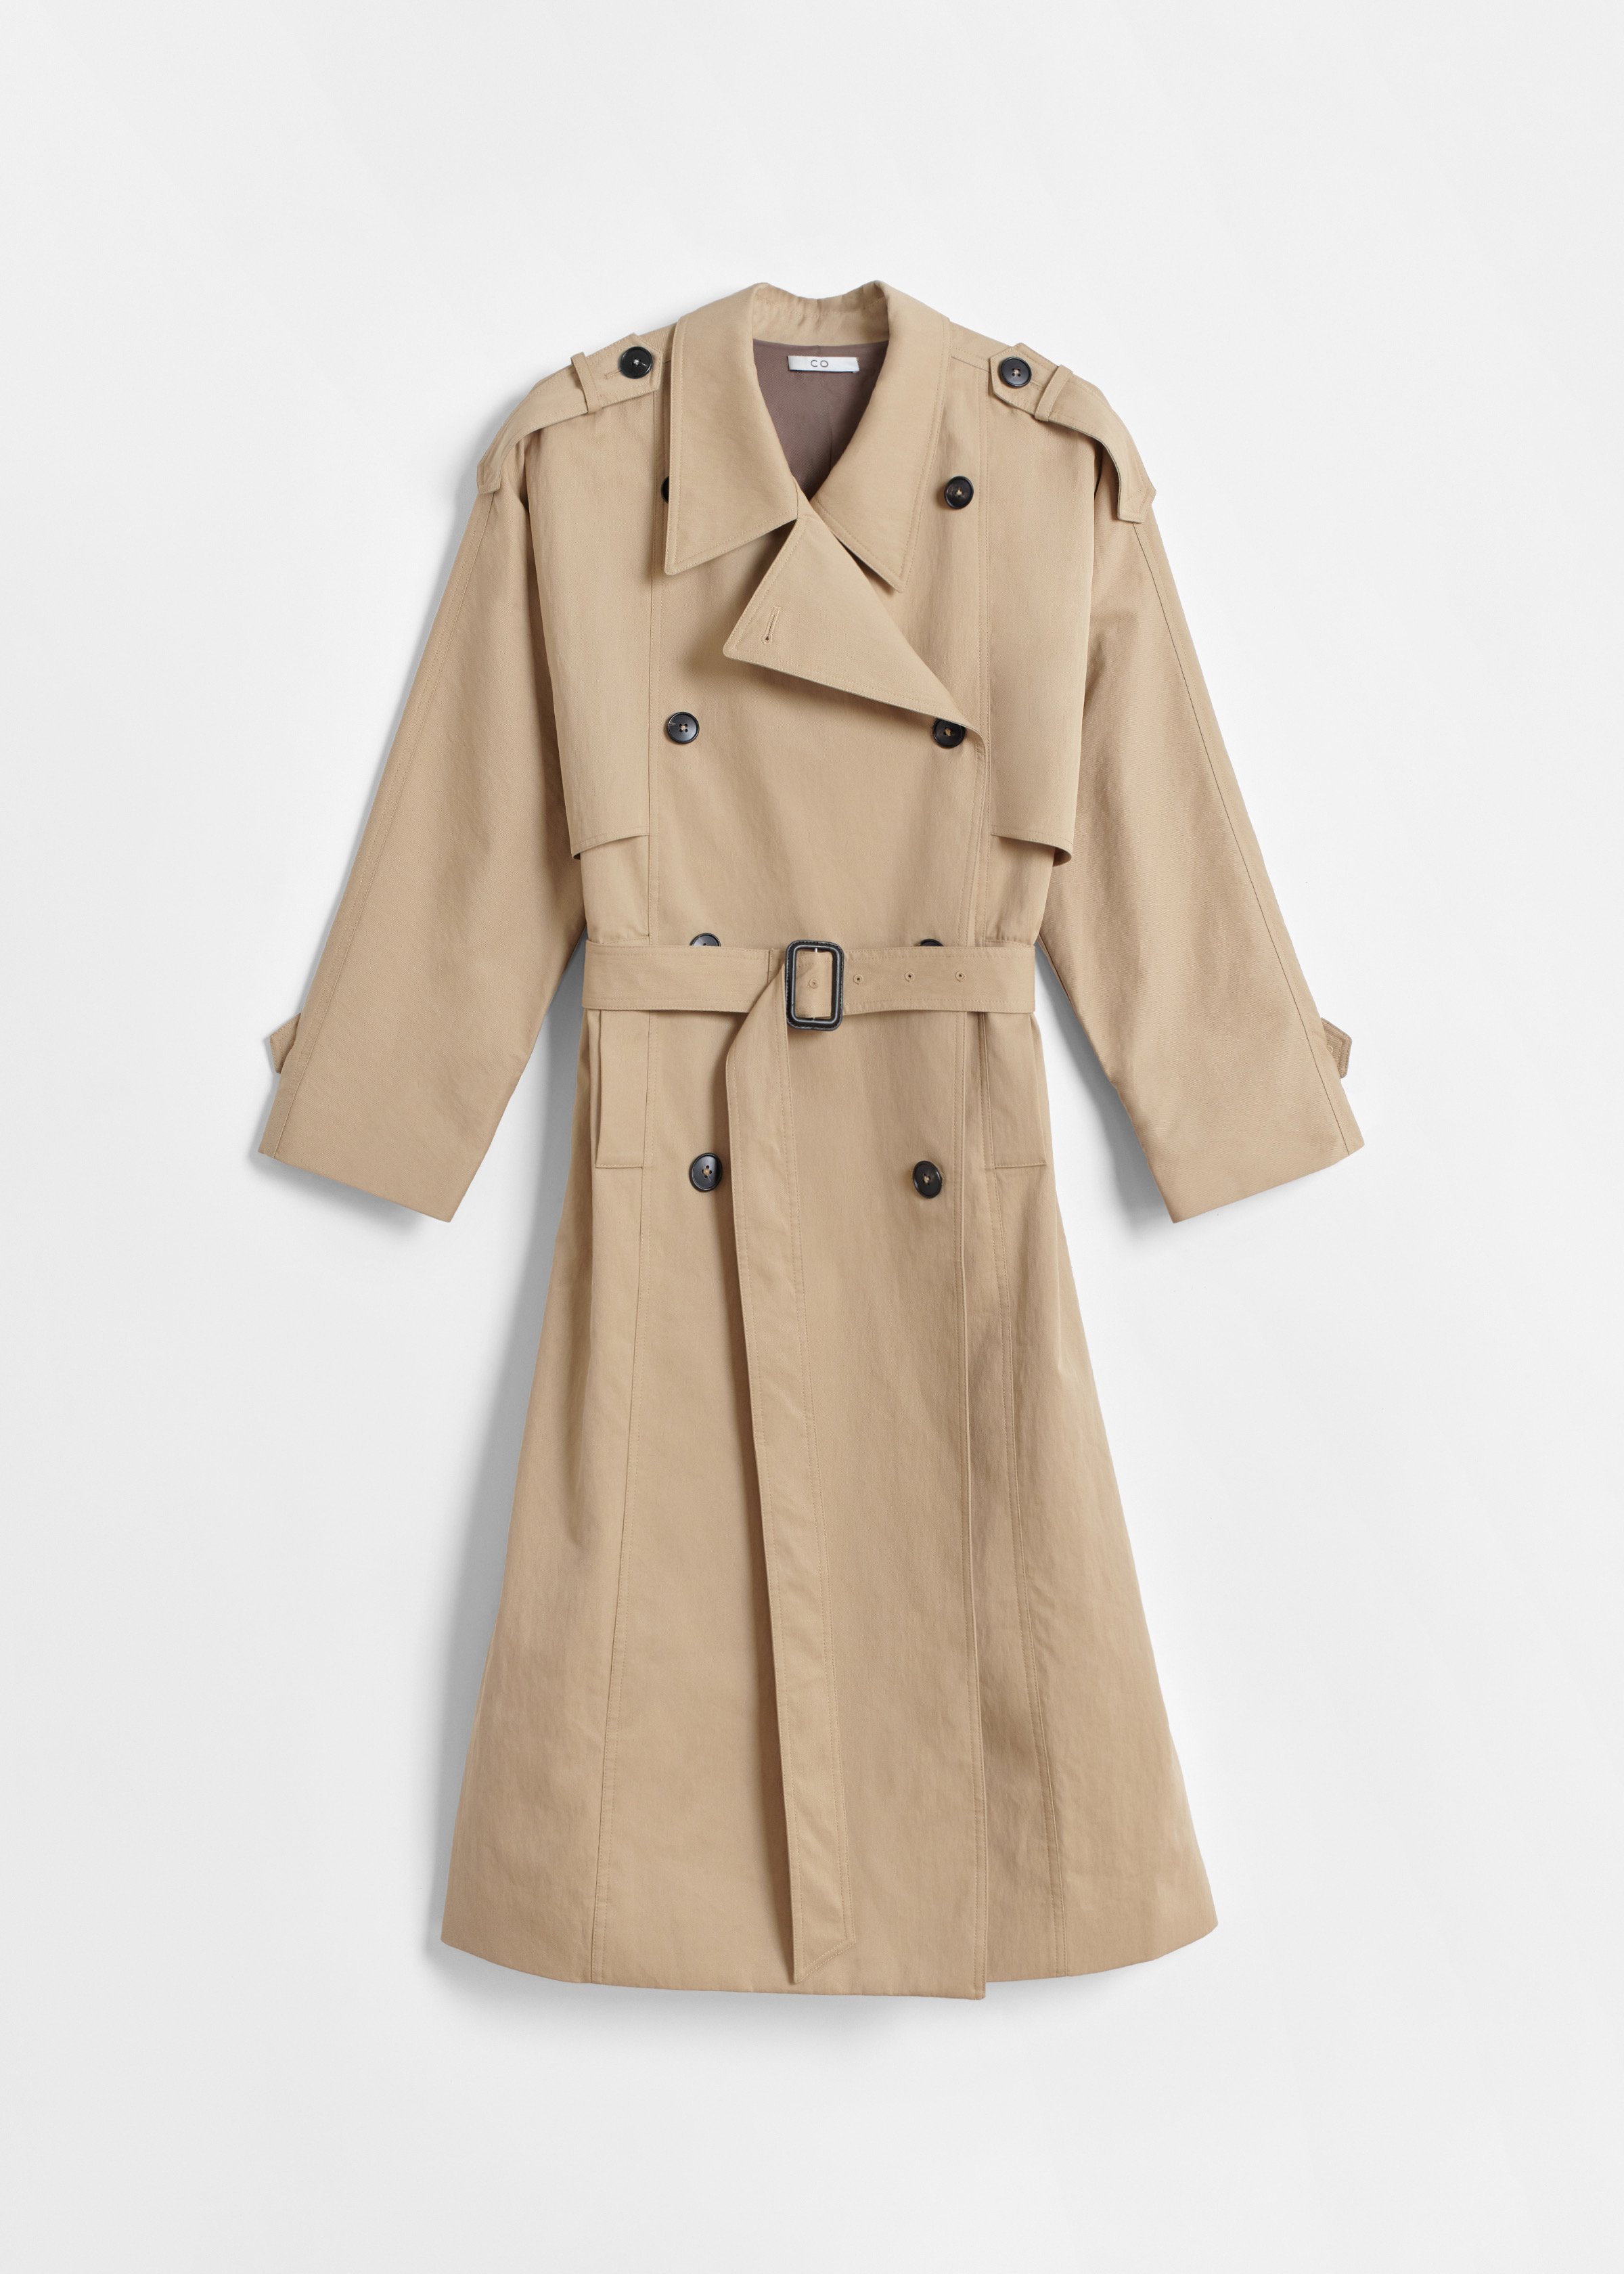 CO - Long Trench Coat in Cotton Twill - Beige